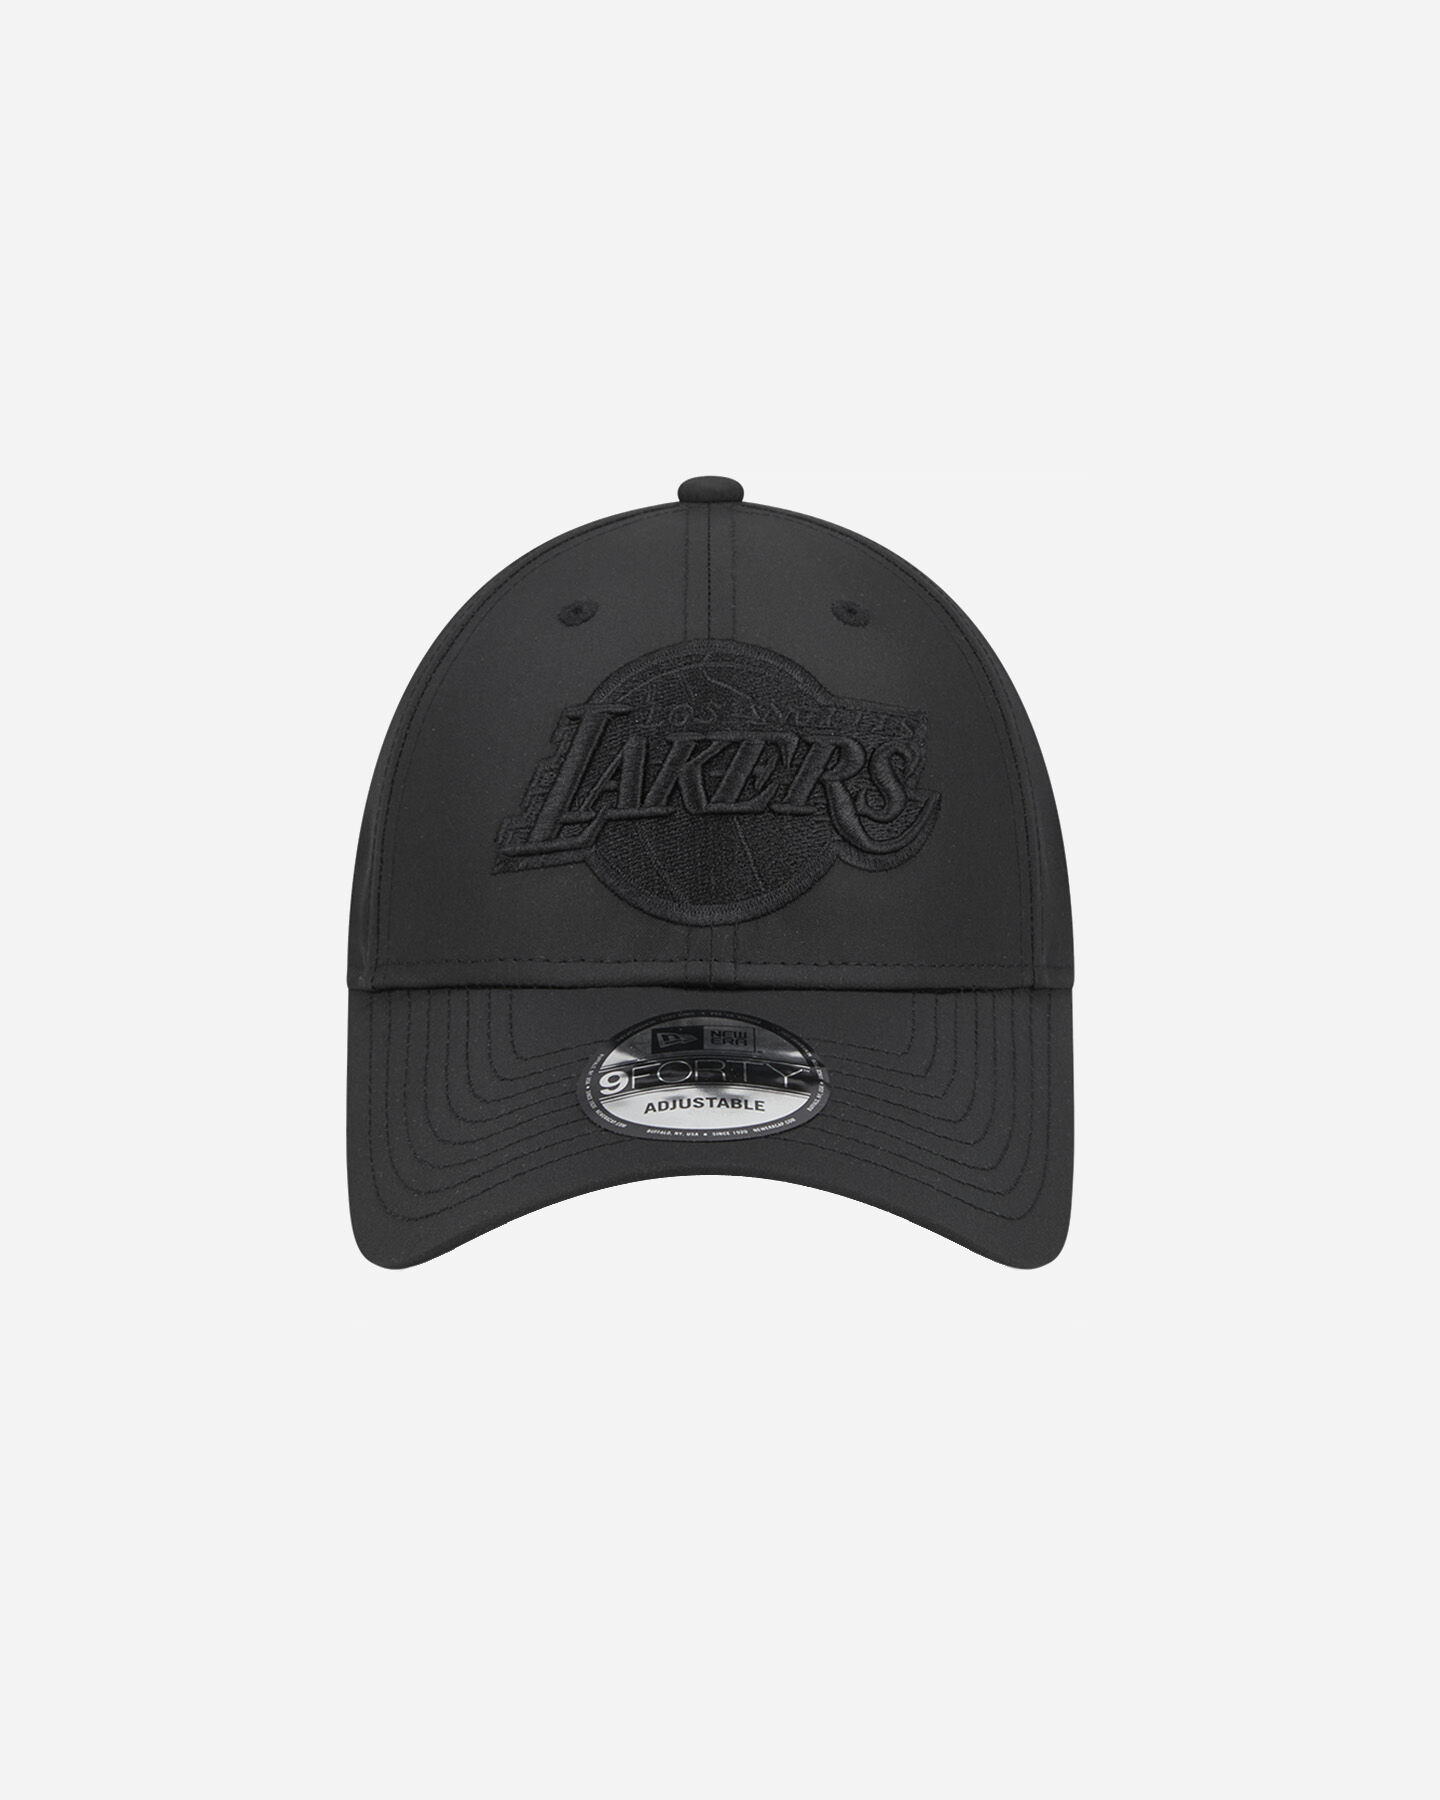  Cappellino NEW ERA 9FORTY GAME PLAY LOS ANGELES LAKERS  S5631001|001|OSFM scatto 1